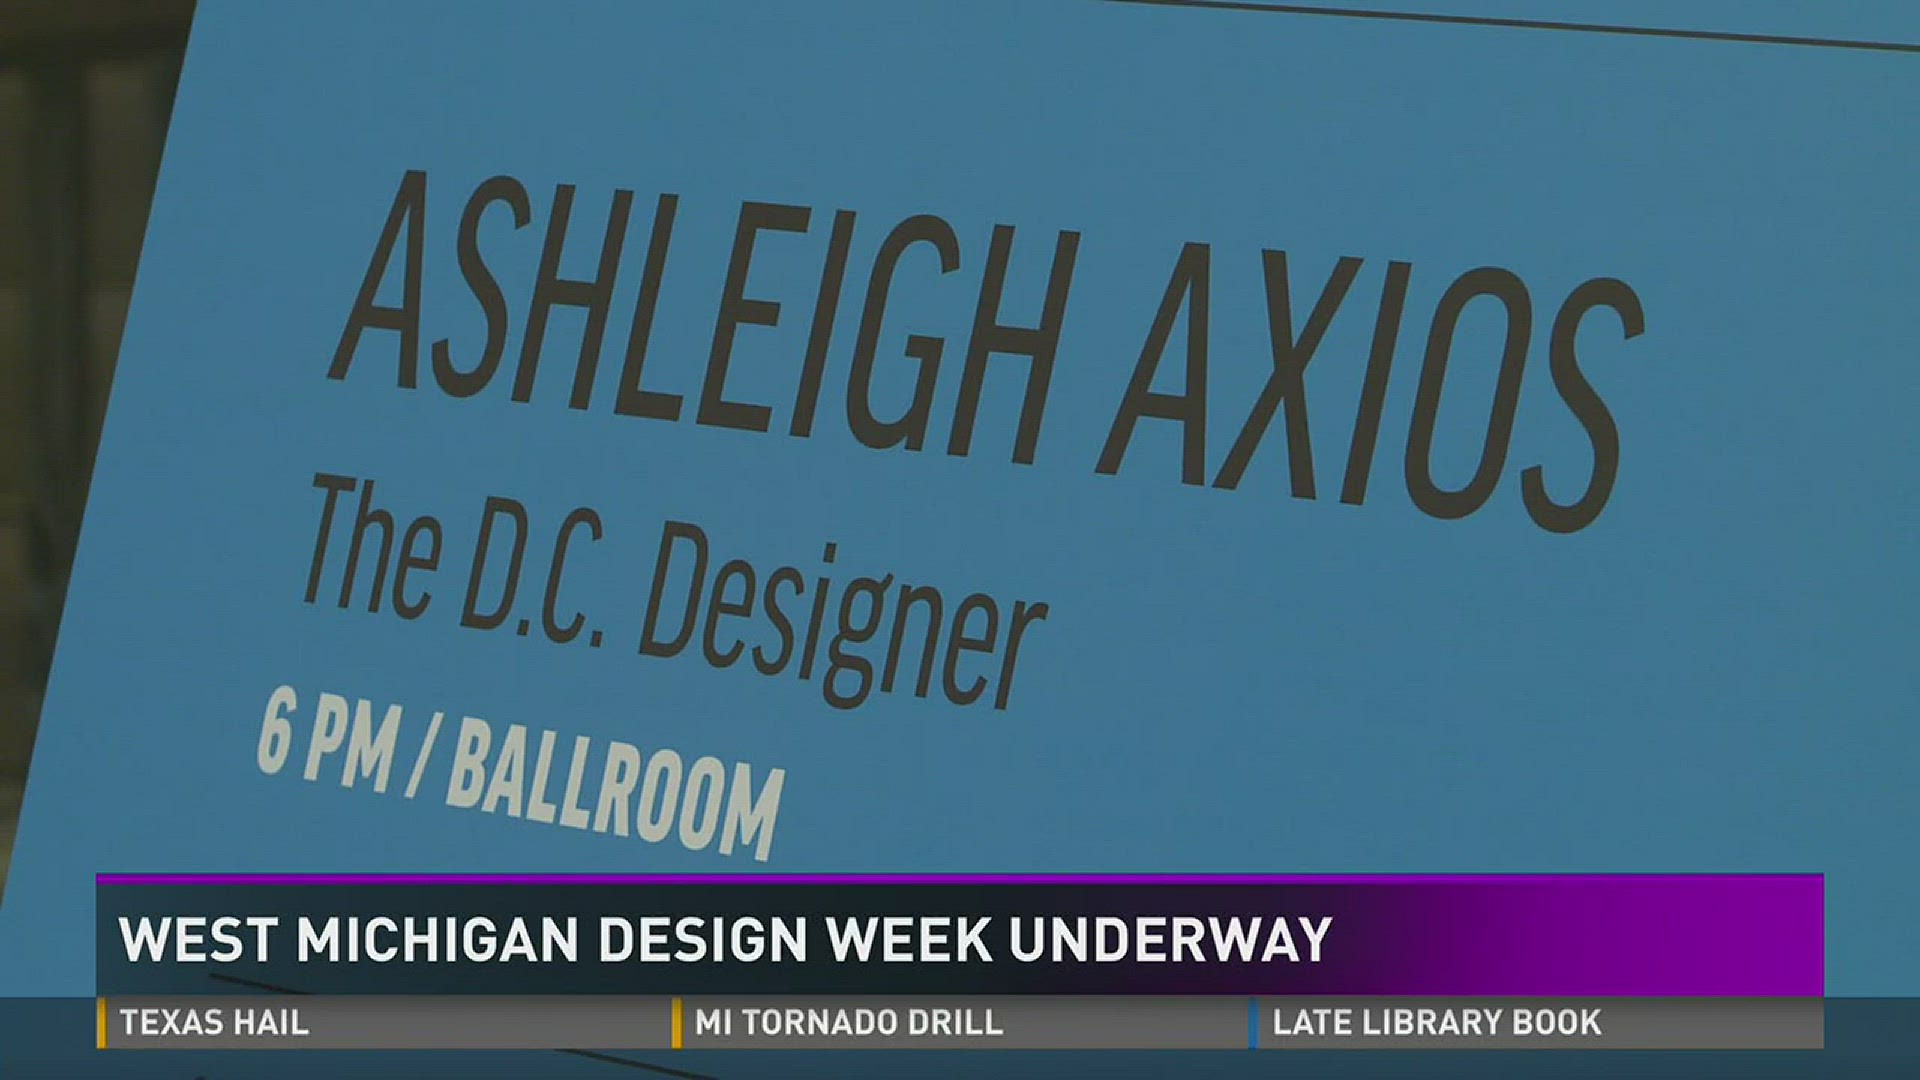 The event was part of West Michigan Design Week, happening through Saturday in Grand Rapids.